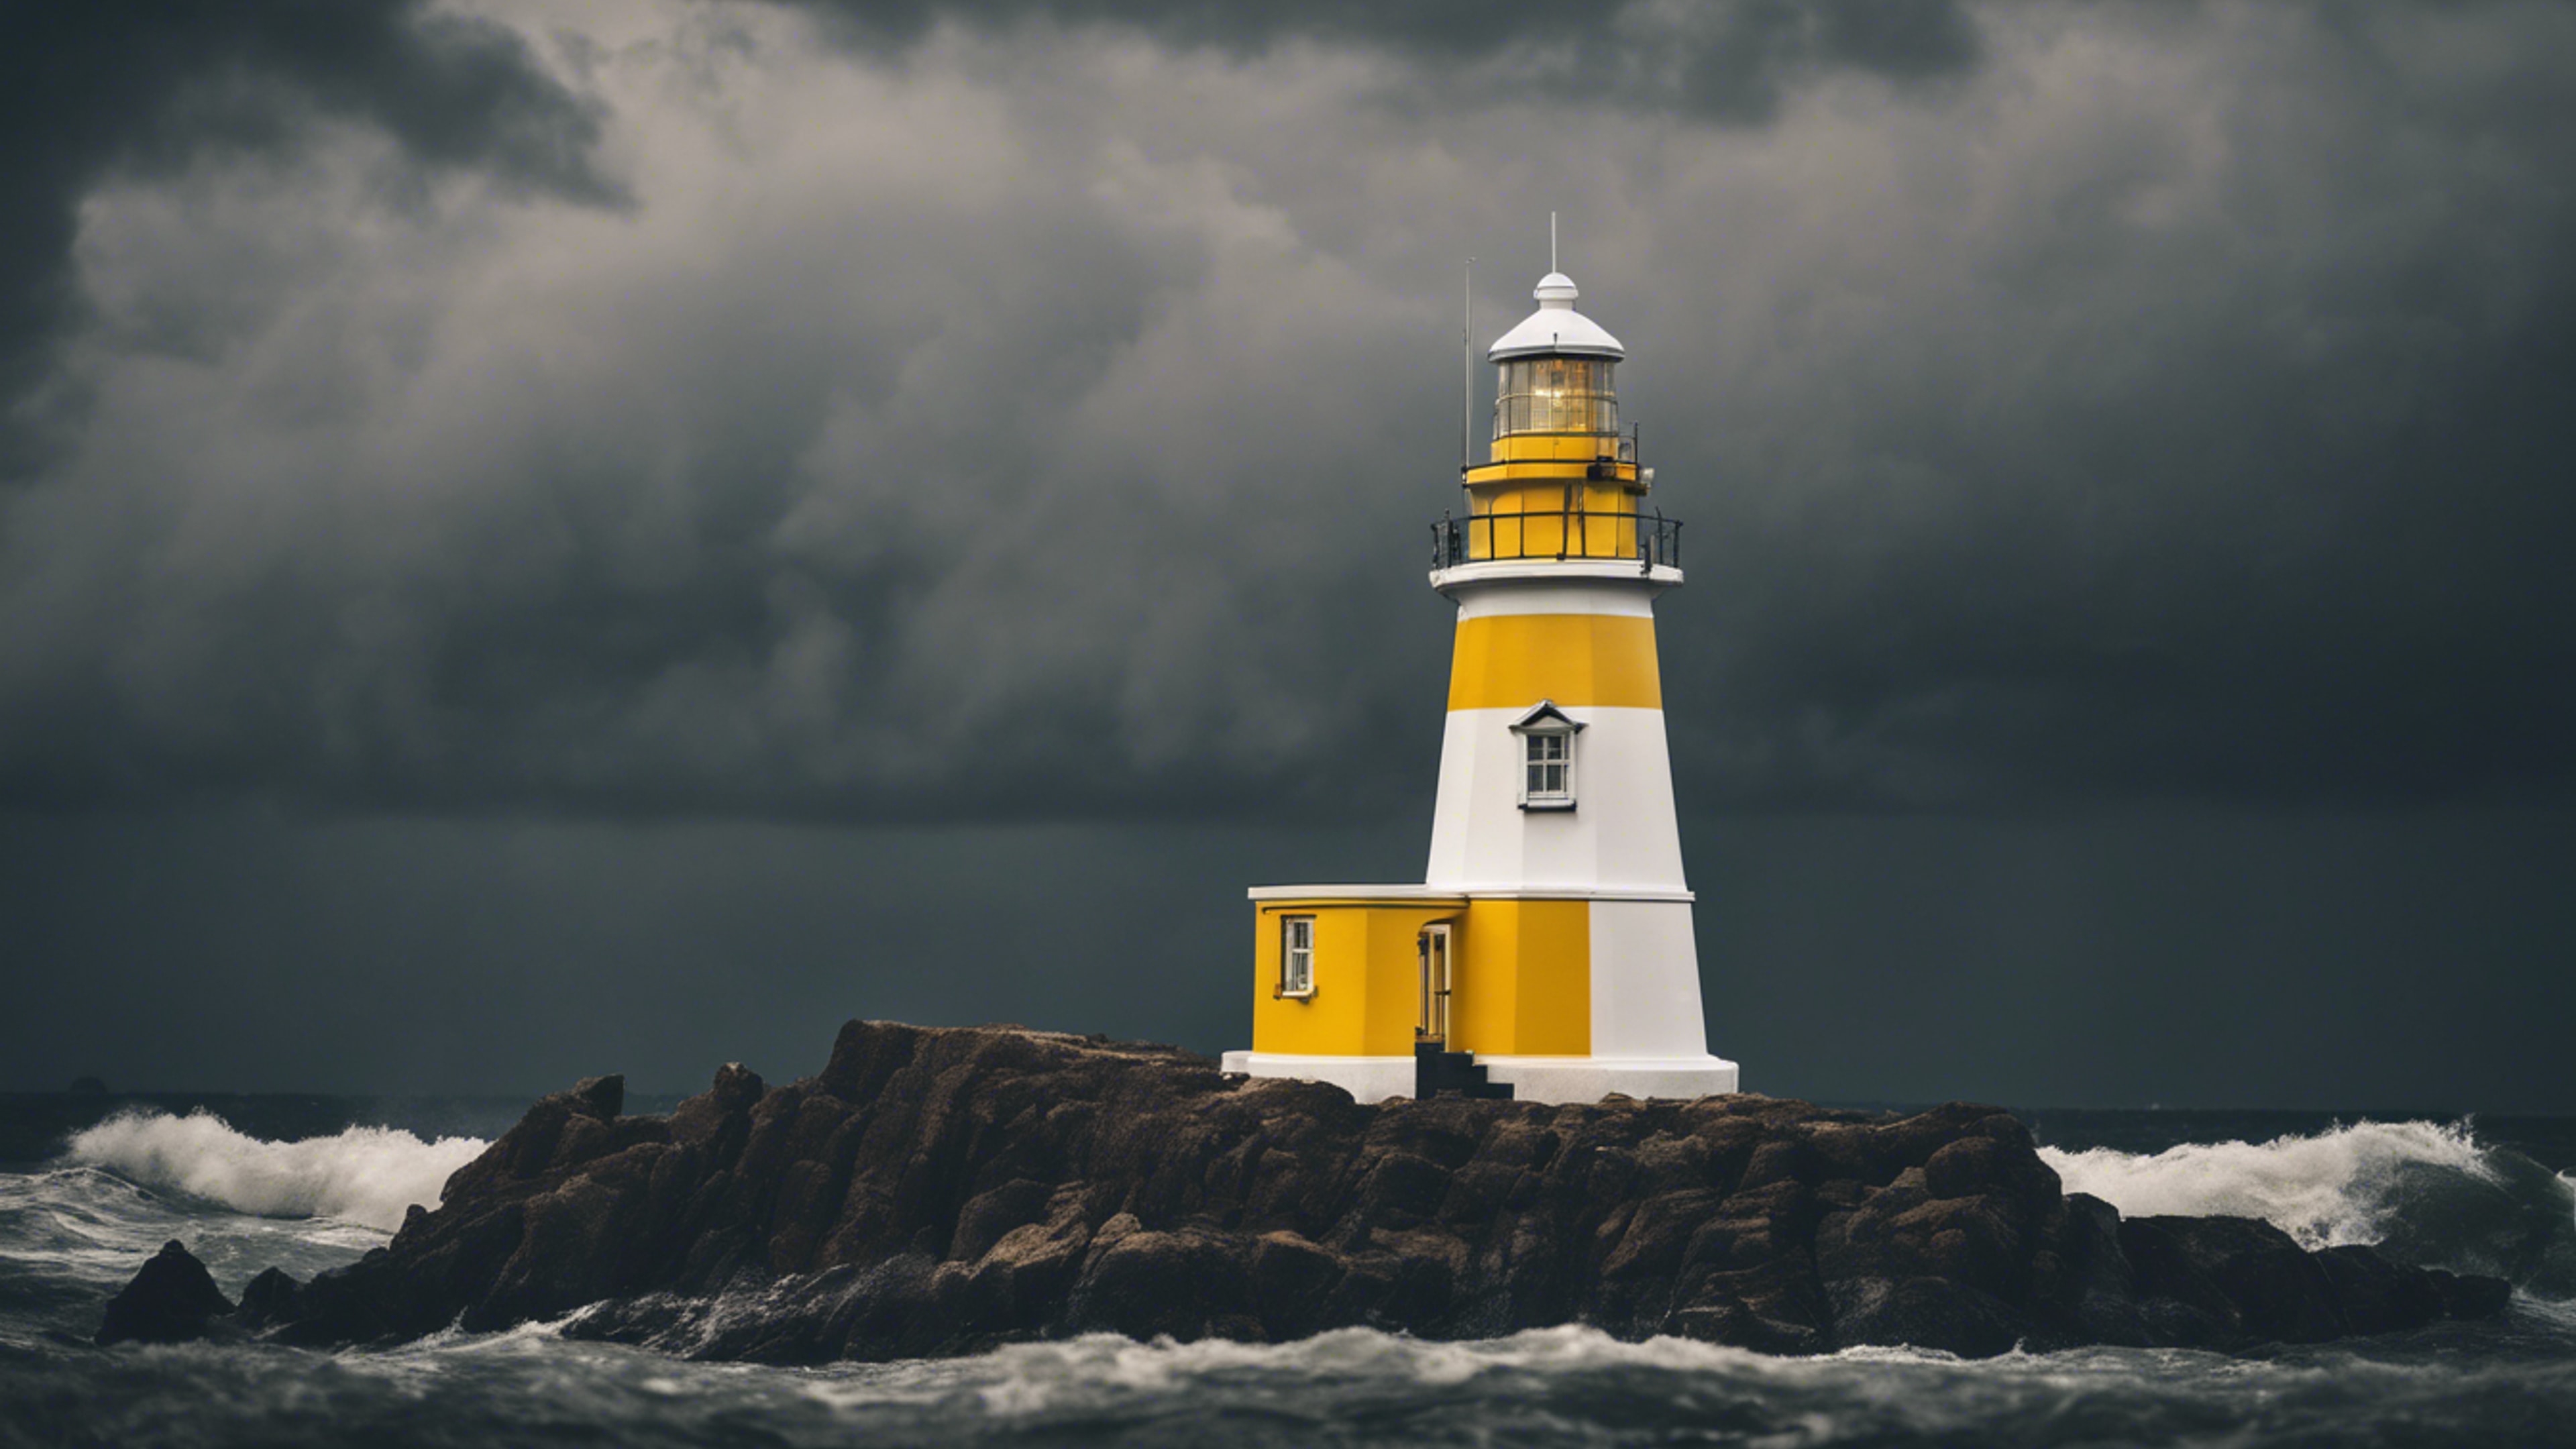 A white and yellow striped lighthouse standing tall against a stormy dark sky. Ფონი[29fc73b96f634852baf9]